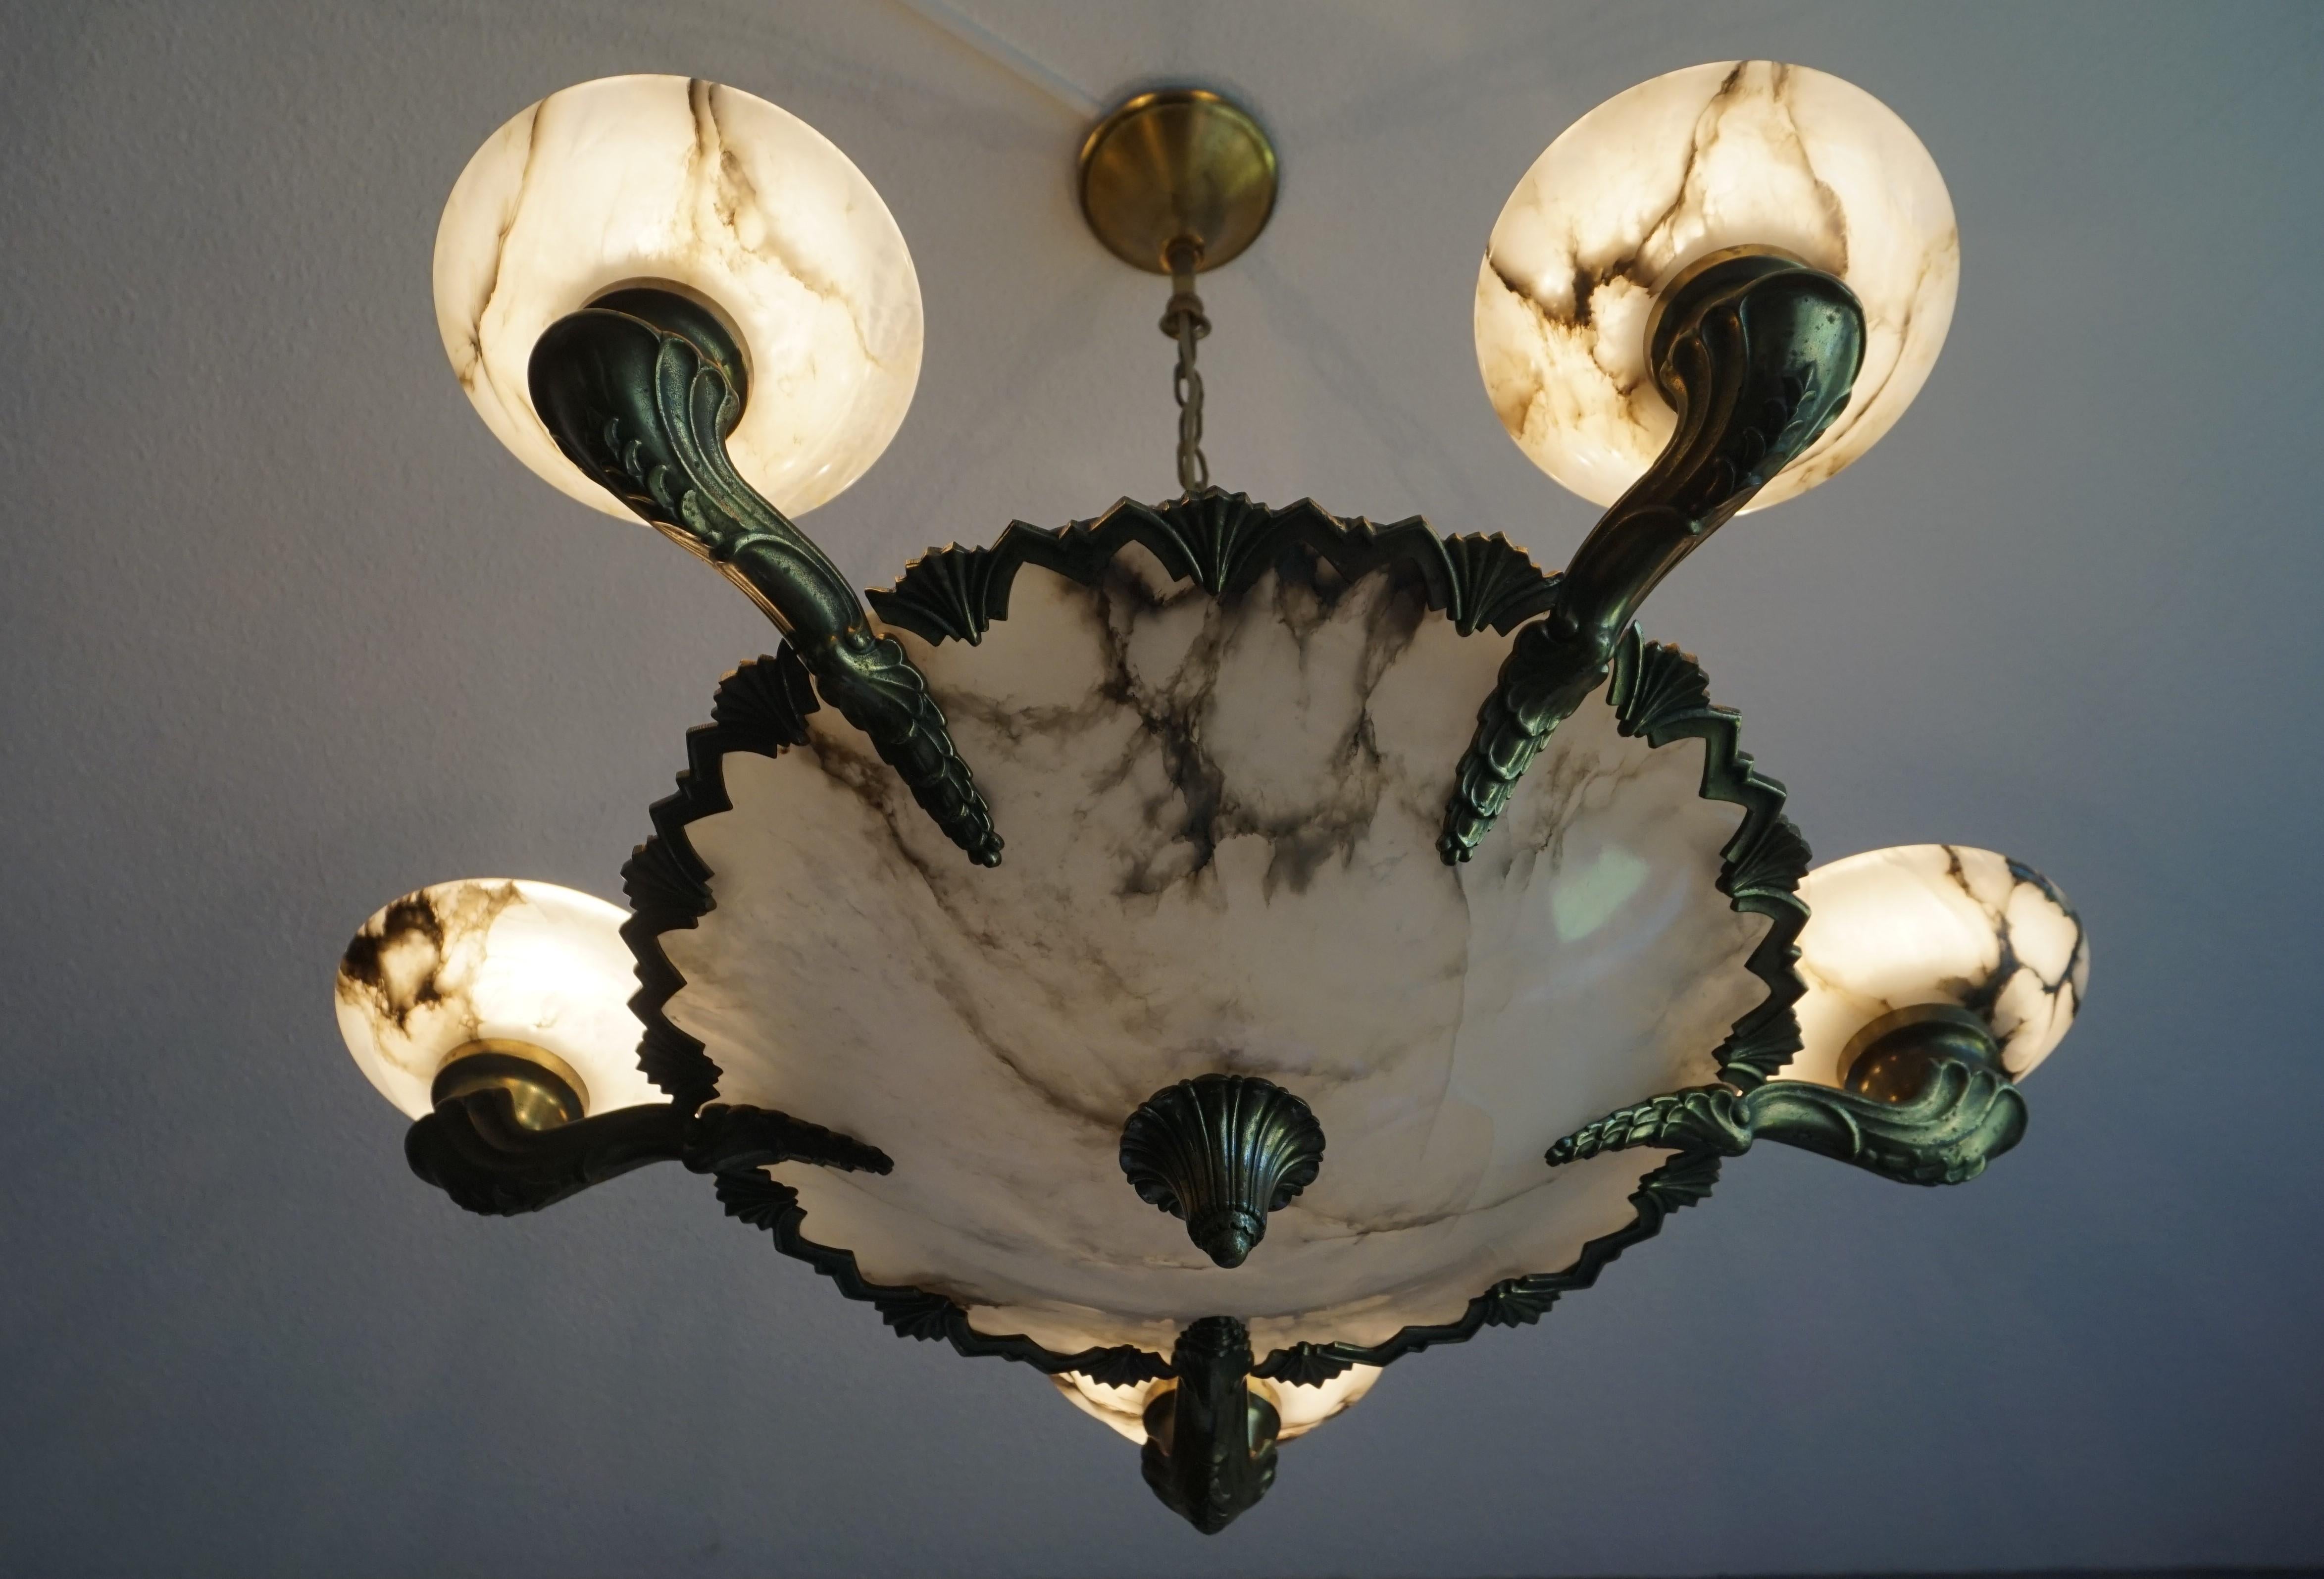 Striking and exclusive 1920s light fixture for the perfect atmosphere.

If you are looking for a remarkable light fixture to grace your living space then this American Art Deco Style chandelier from circa 1920 could very well be perfect. The